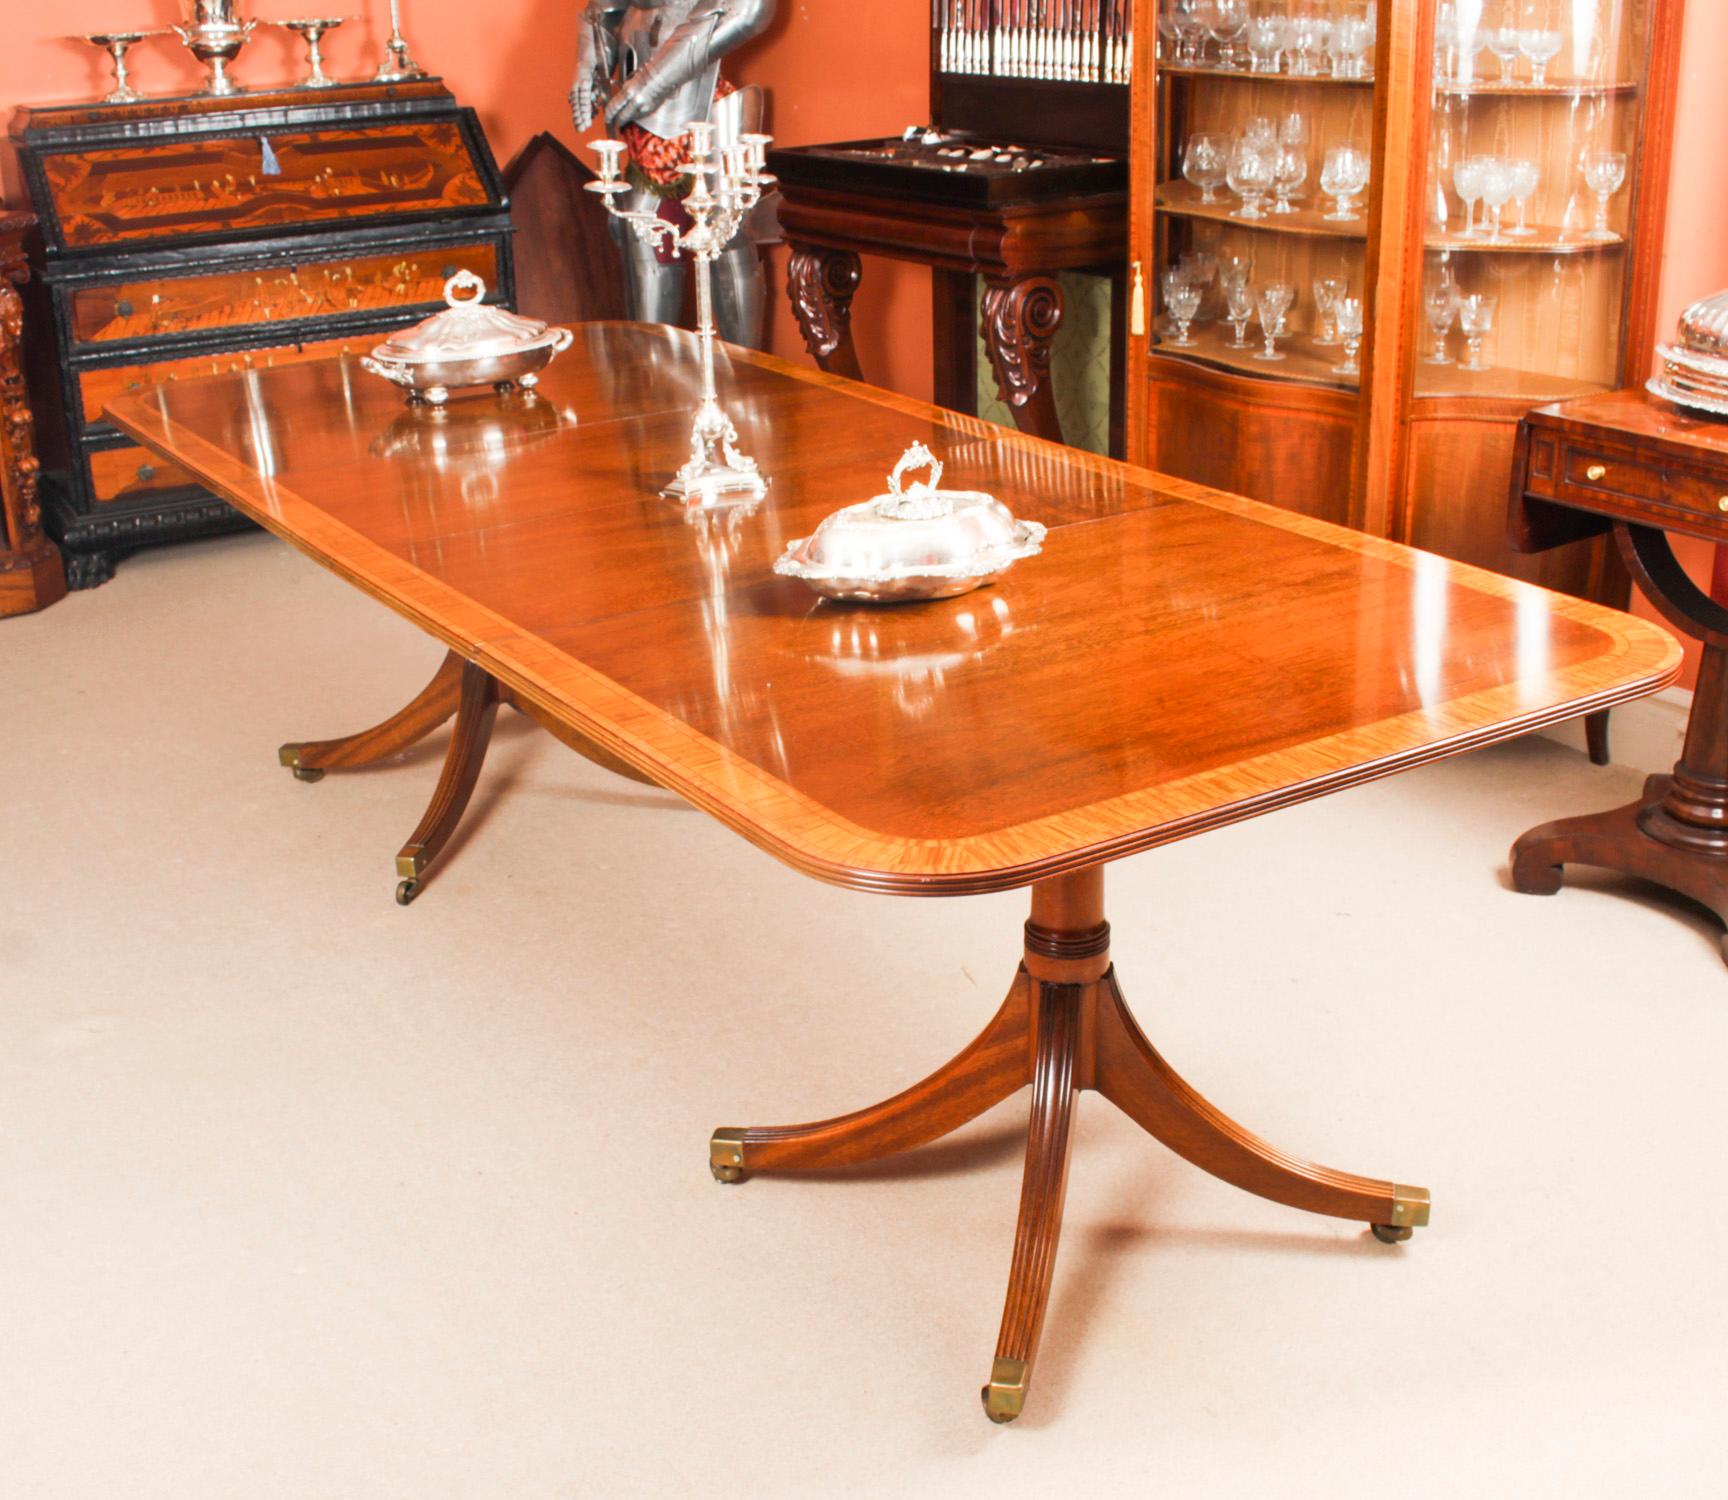 This is fabulous Vintage Regency Revival dining table by the master cabinet maker William Tillman, Circa 1980 in date.

The table is made of stunning solid flame mahogany with satinwood crossbanding and is raised on twin 